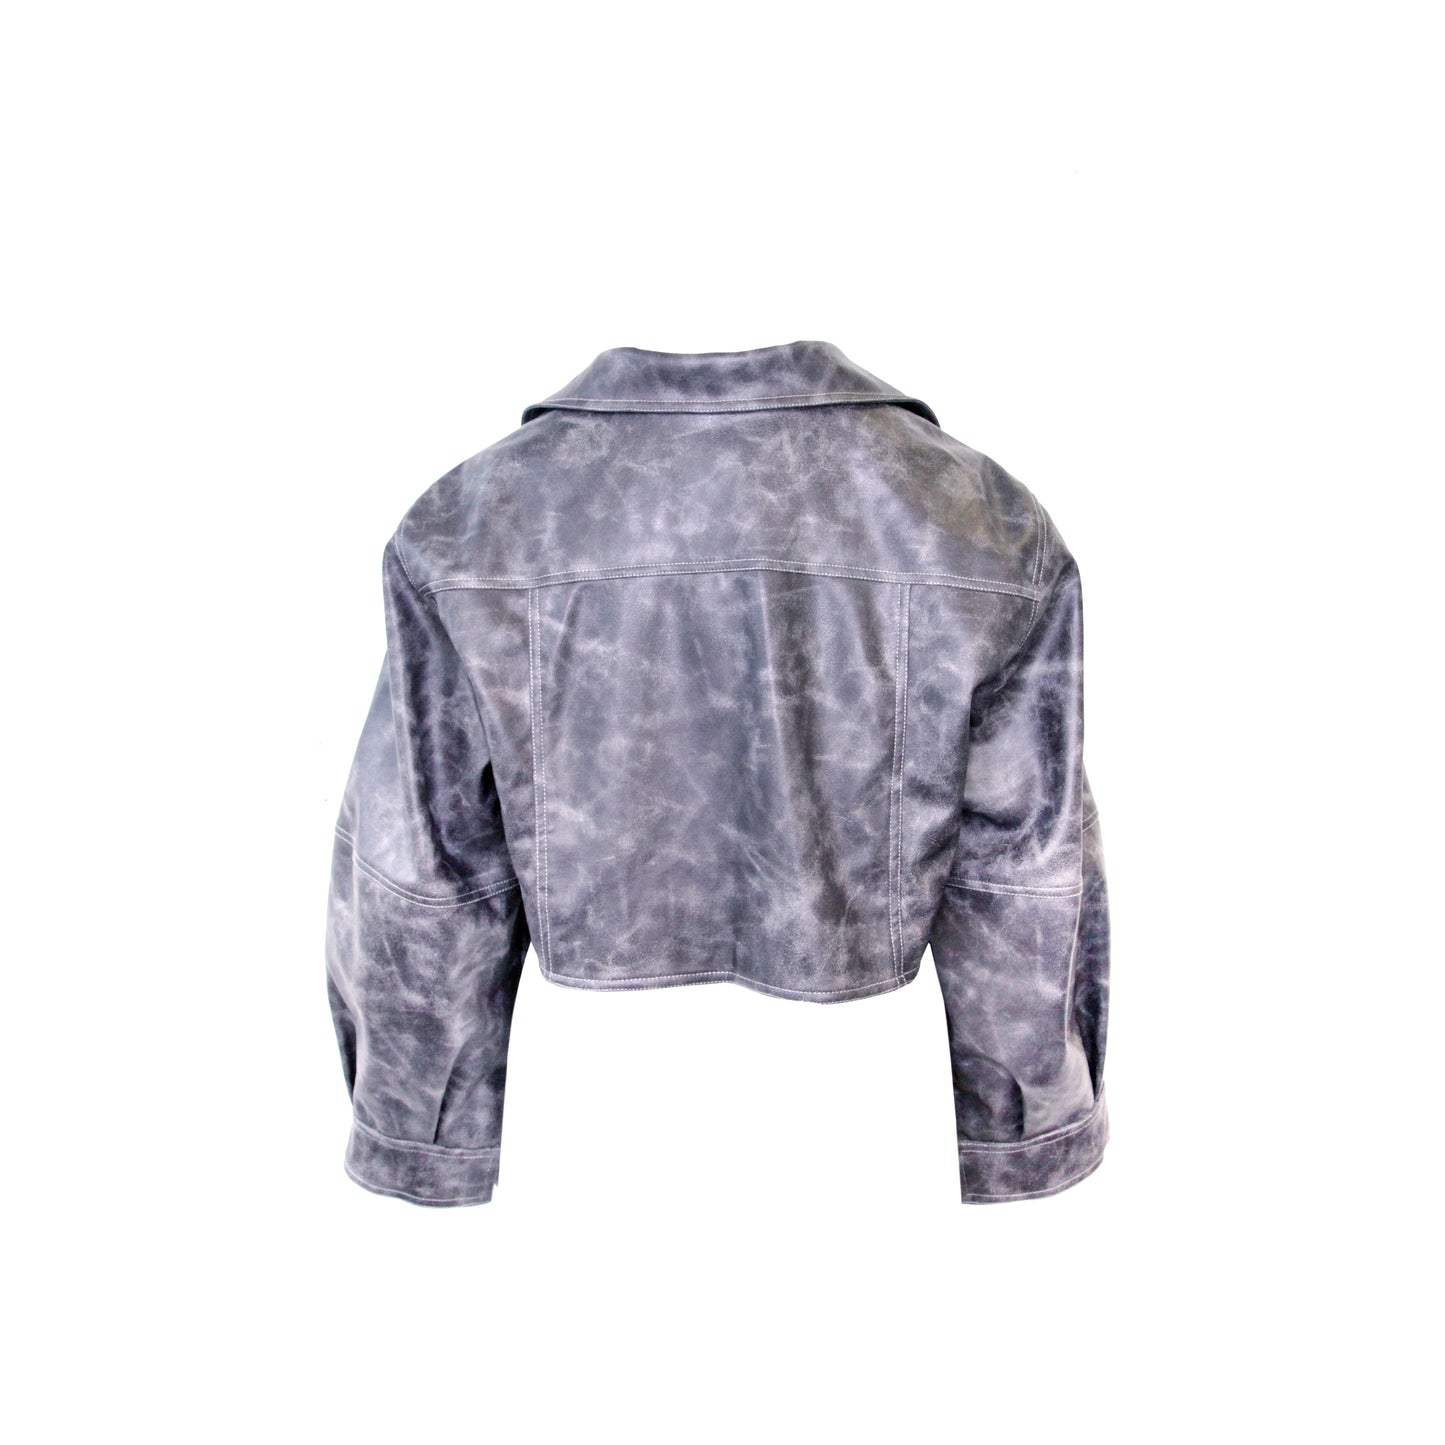 DANSHUU Charcoal Frosted Cropped Leather Jacket